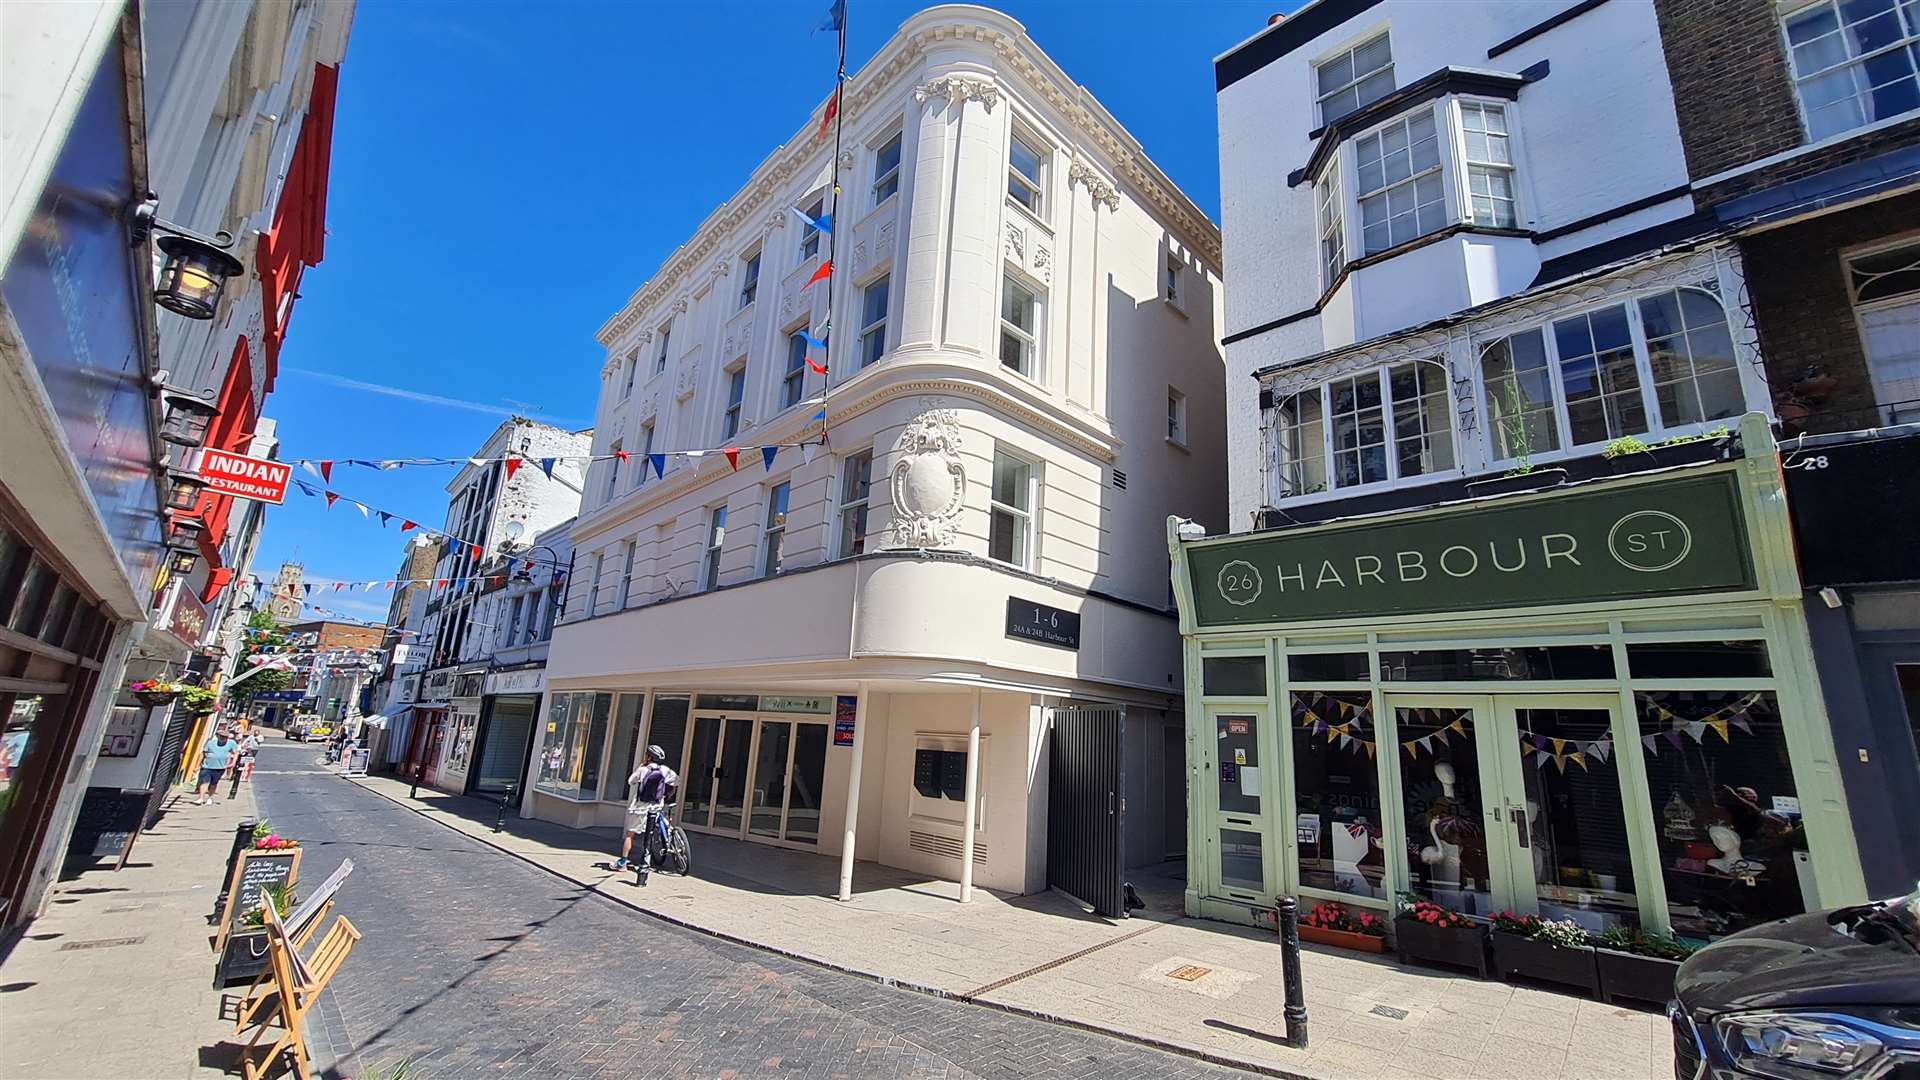 The previously run-down Harbour Street in Ramsgate is being transformed